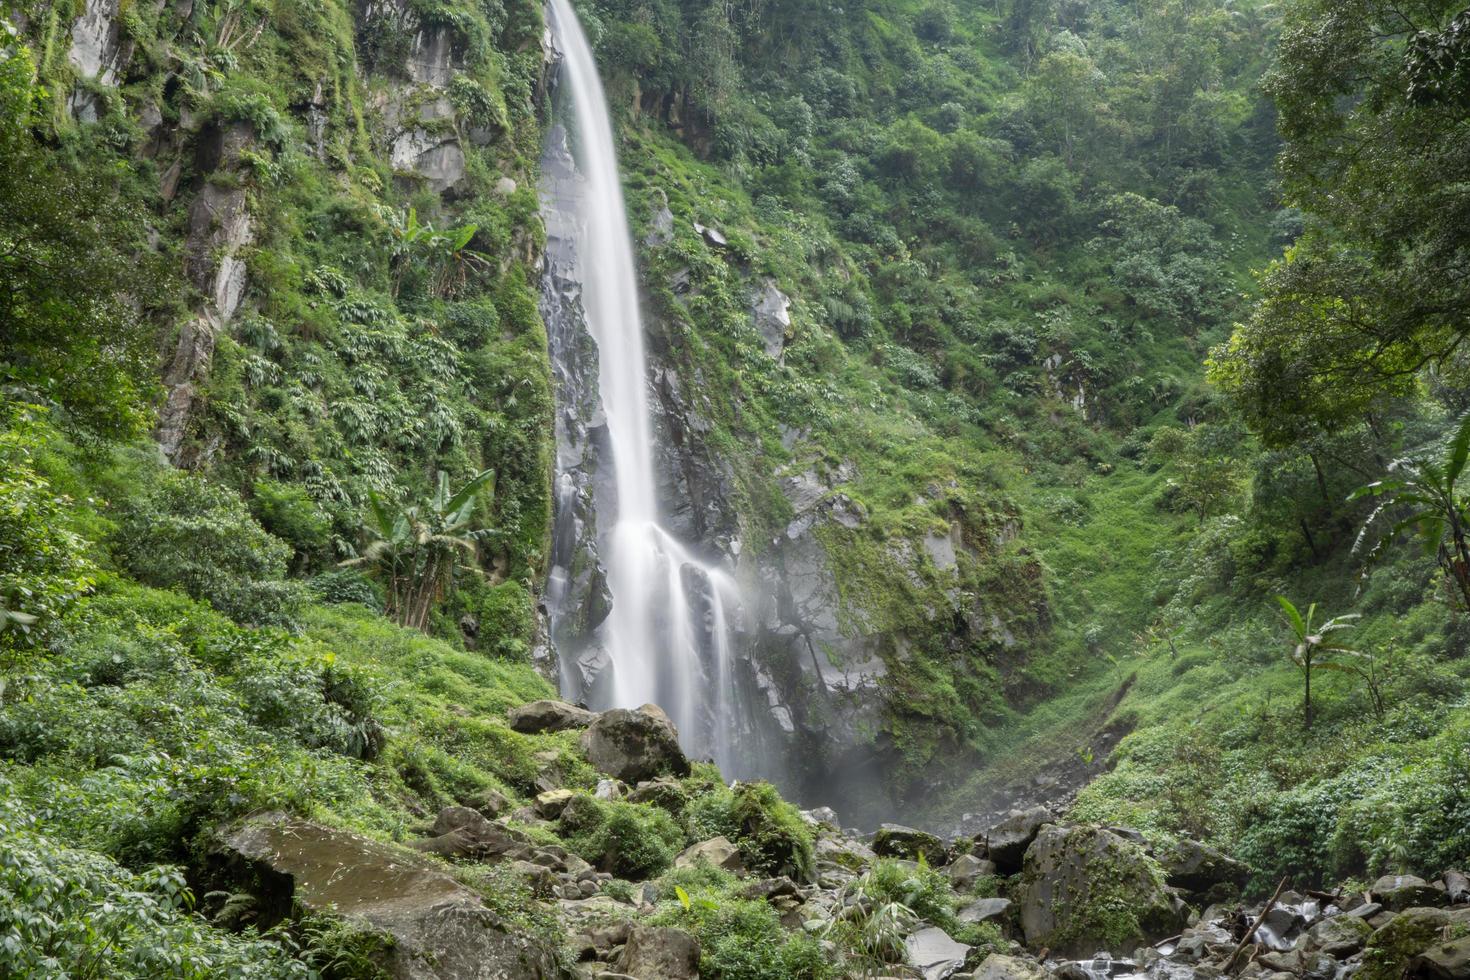 Scenery of single water fall on the tropical forest. The photo is suitable to use for adventure content media, nature poster and forest background.